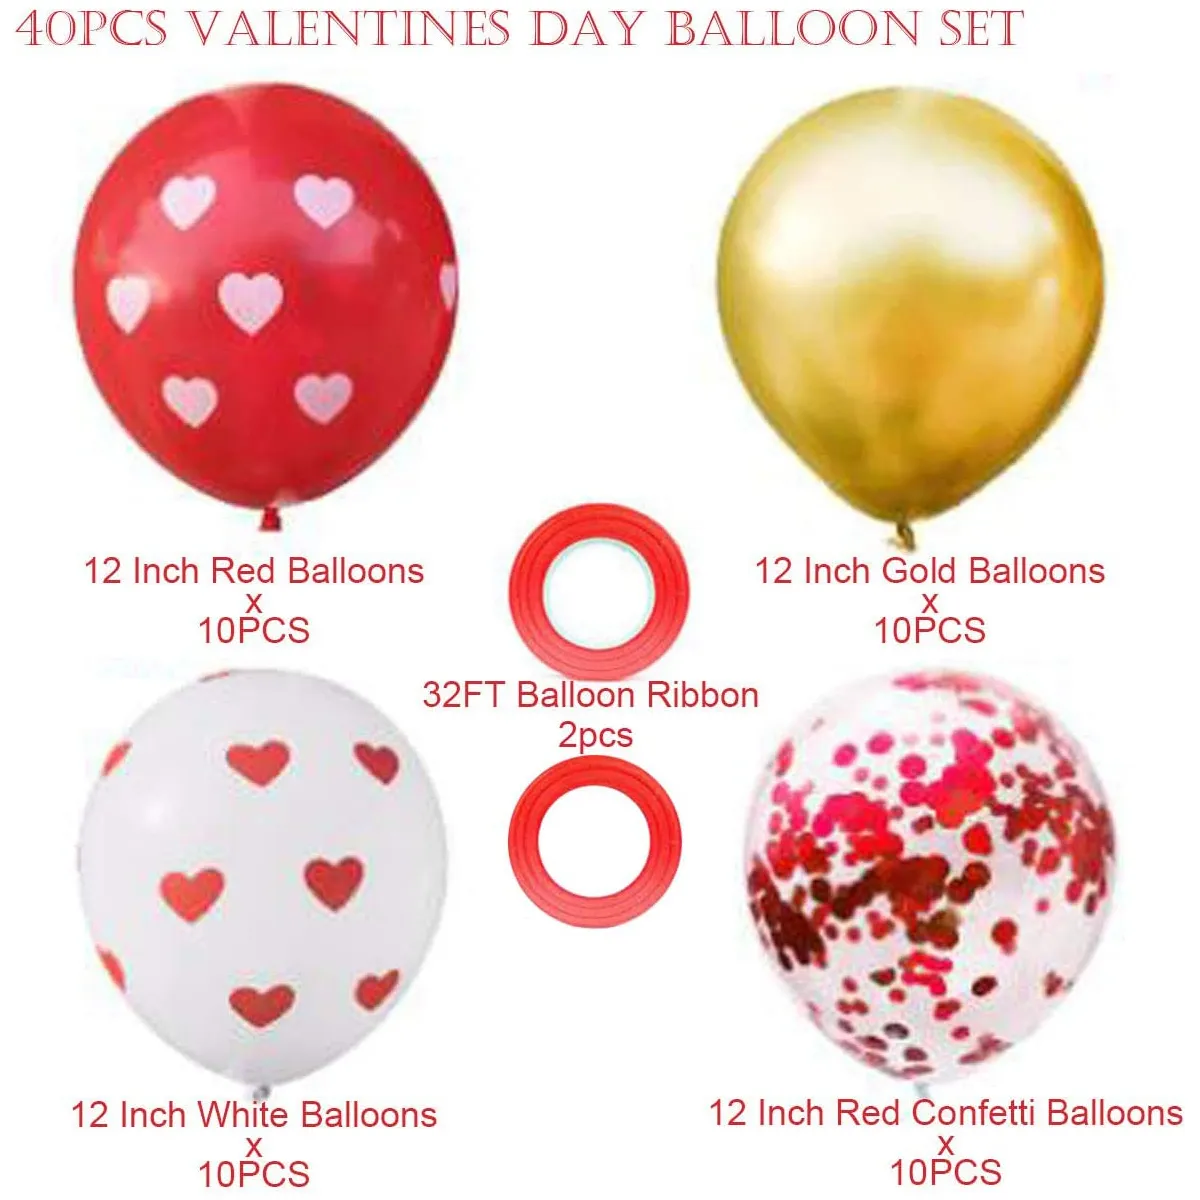 

40pcs Valentines Day Decorations Party Balloons Kit Heart Printed Balloons Confetti Balloons with Balloon Ribbon Party Supplies Decorations